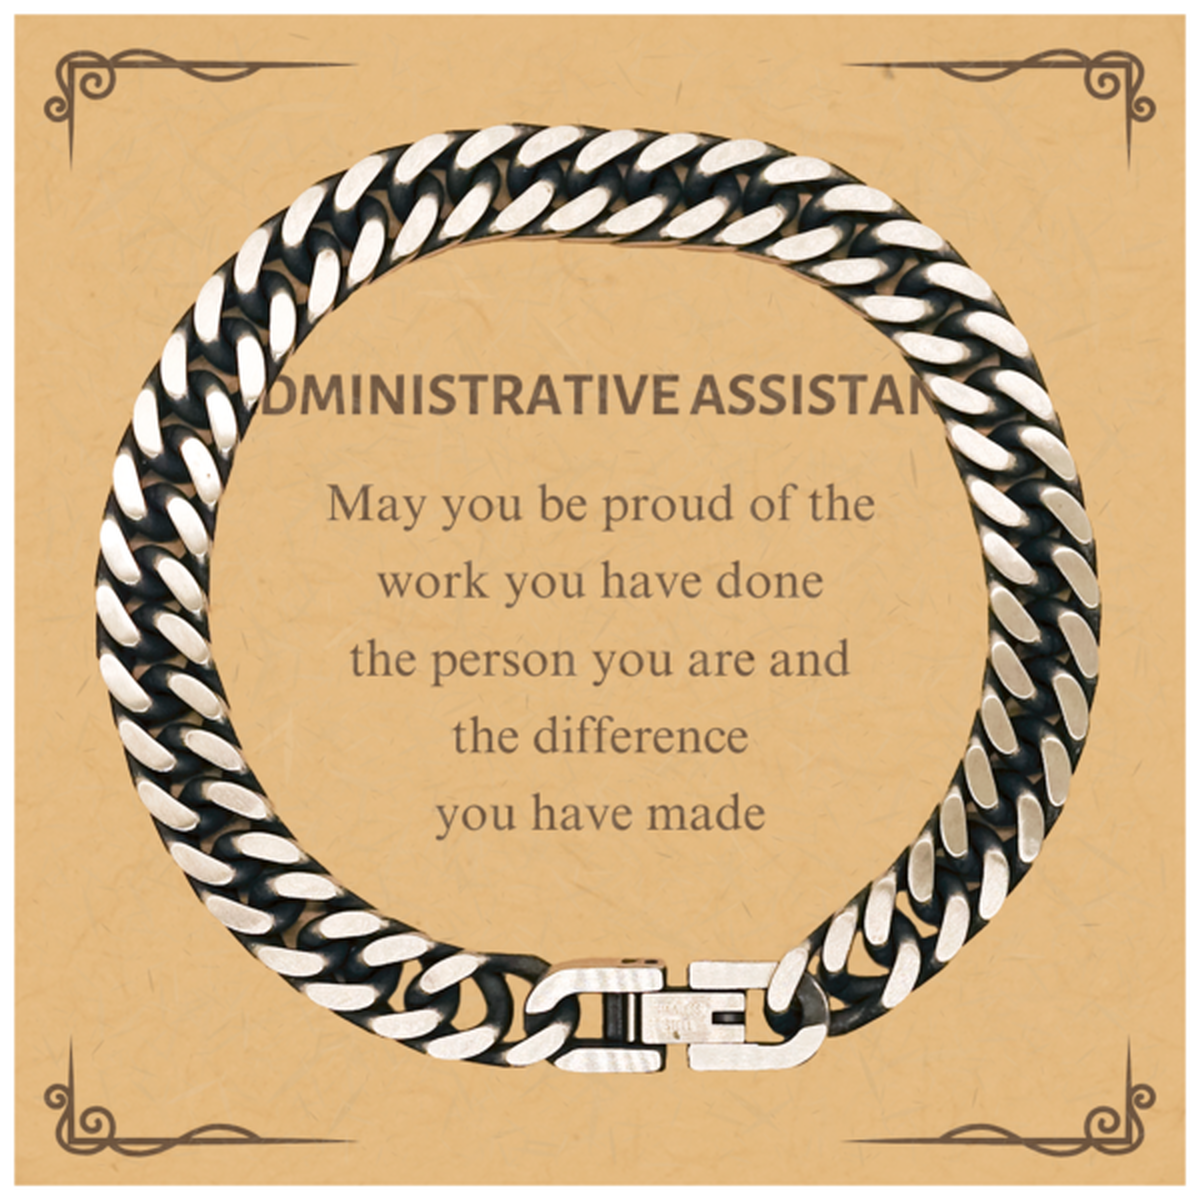 Administrative Assistant May you be proud of the work you have done, Retirement Administrative Assistant Cuban Link Chain Bracelet for Colleague Appreciation Gifts Amazing for Administrative Assistant